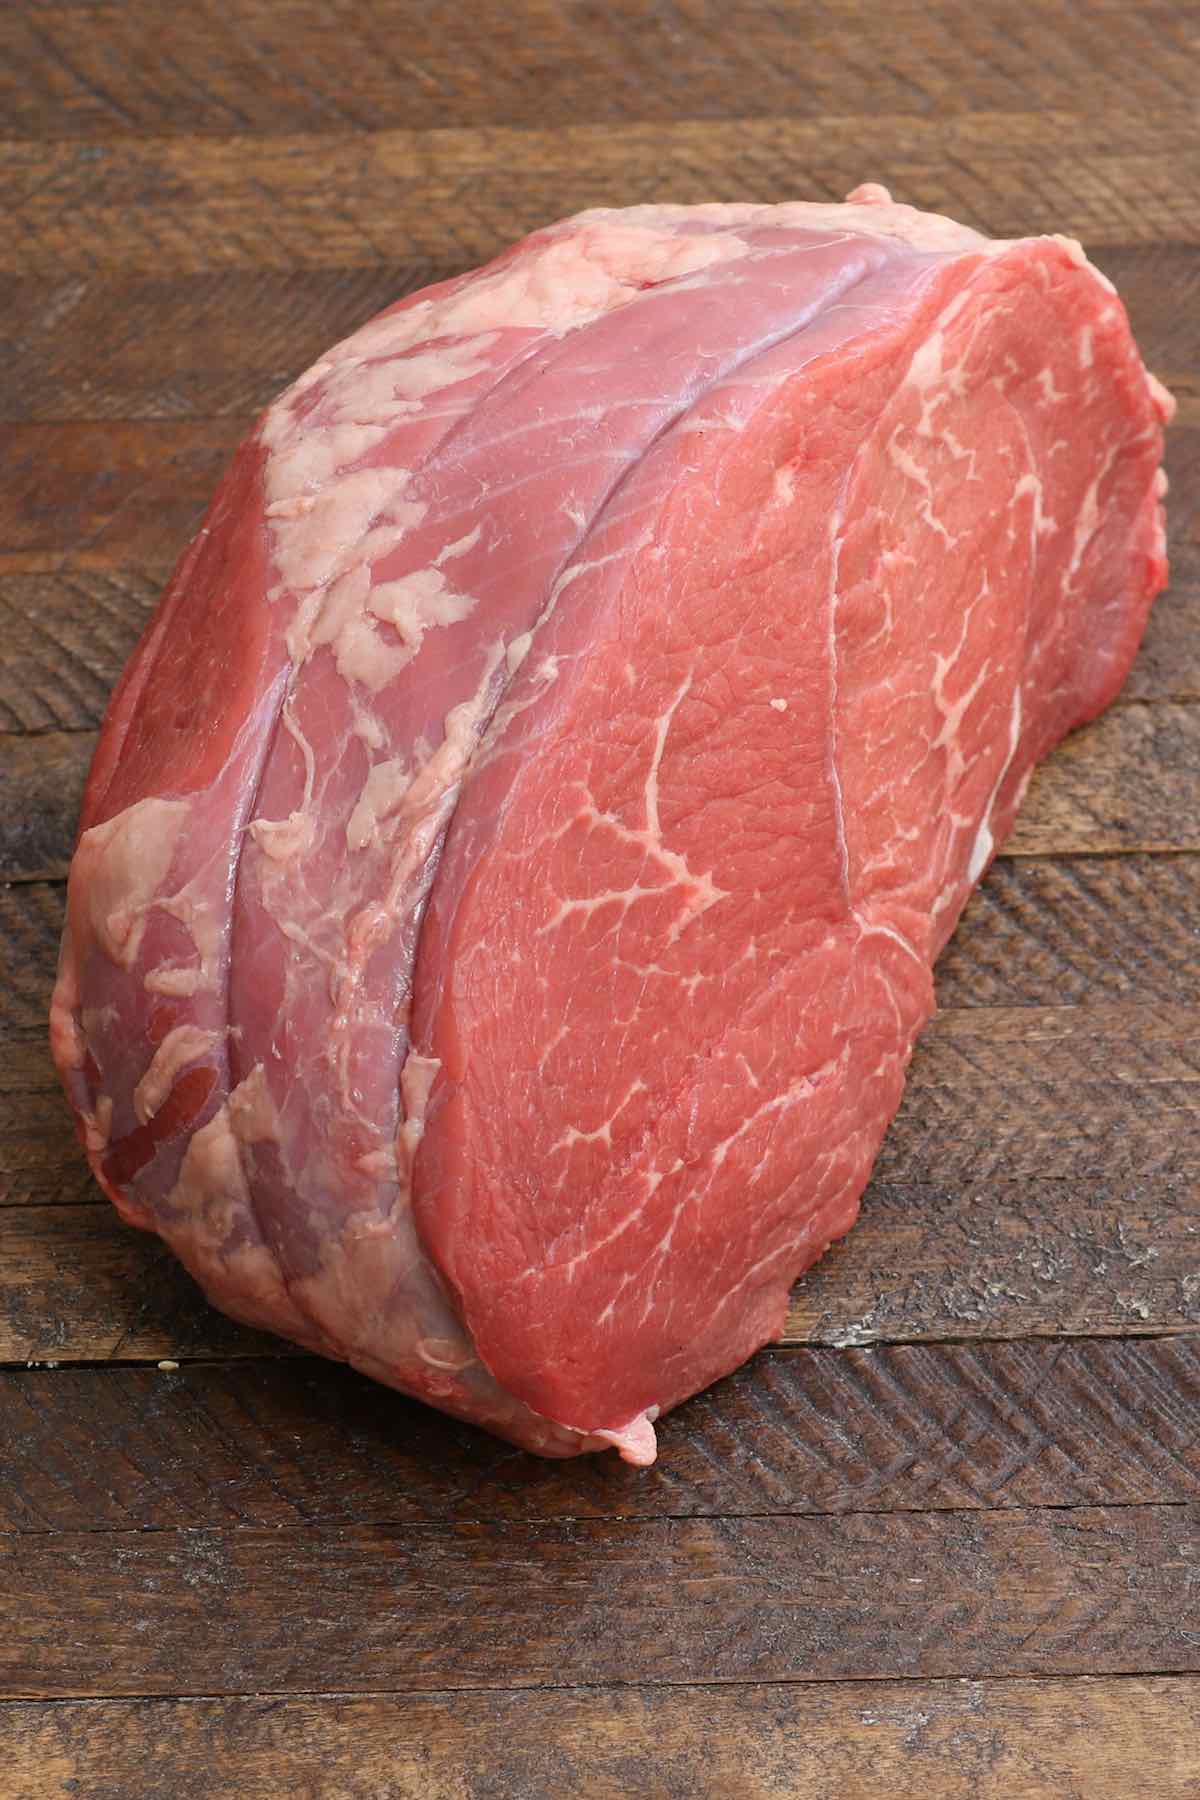 An raw 4-pound sirloin tip roast showing the lean texture of the meat